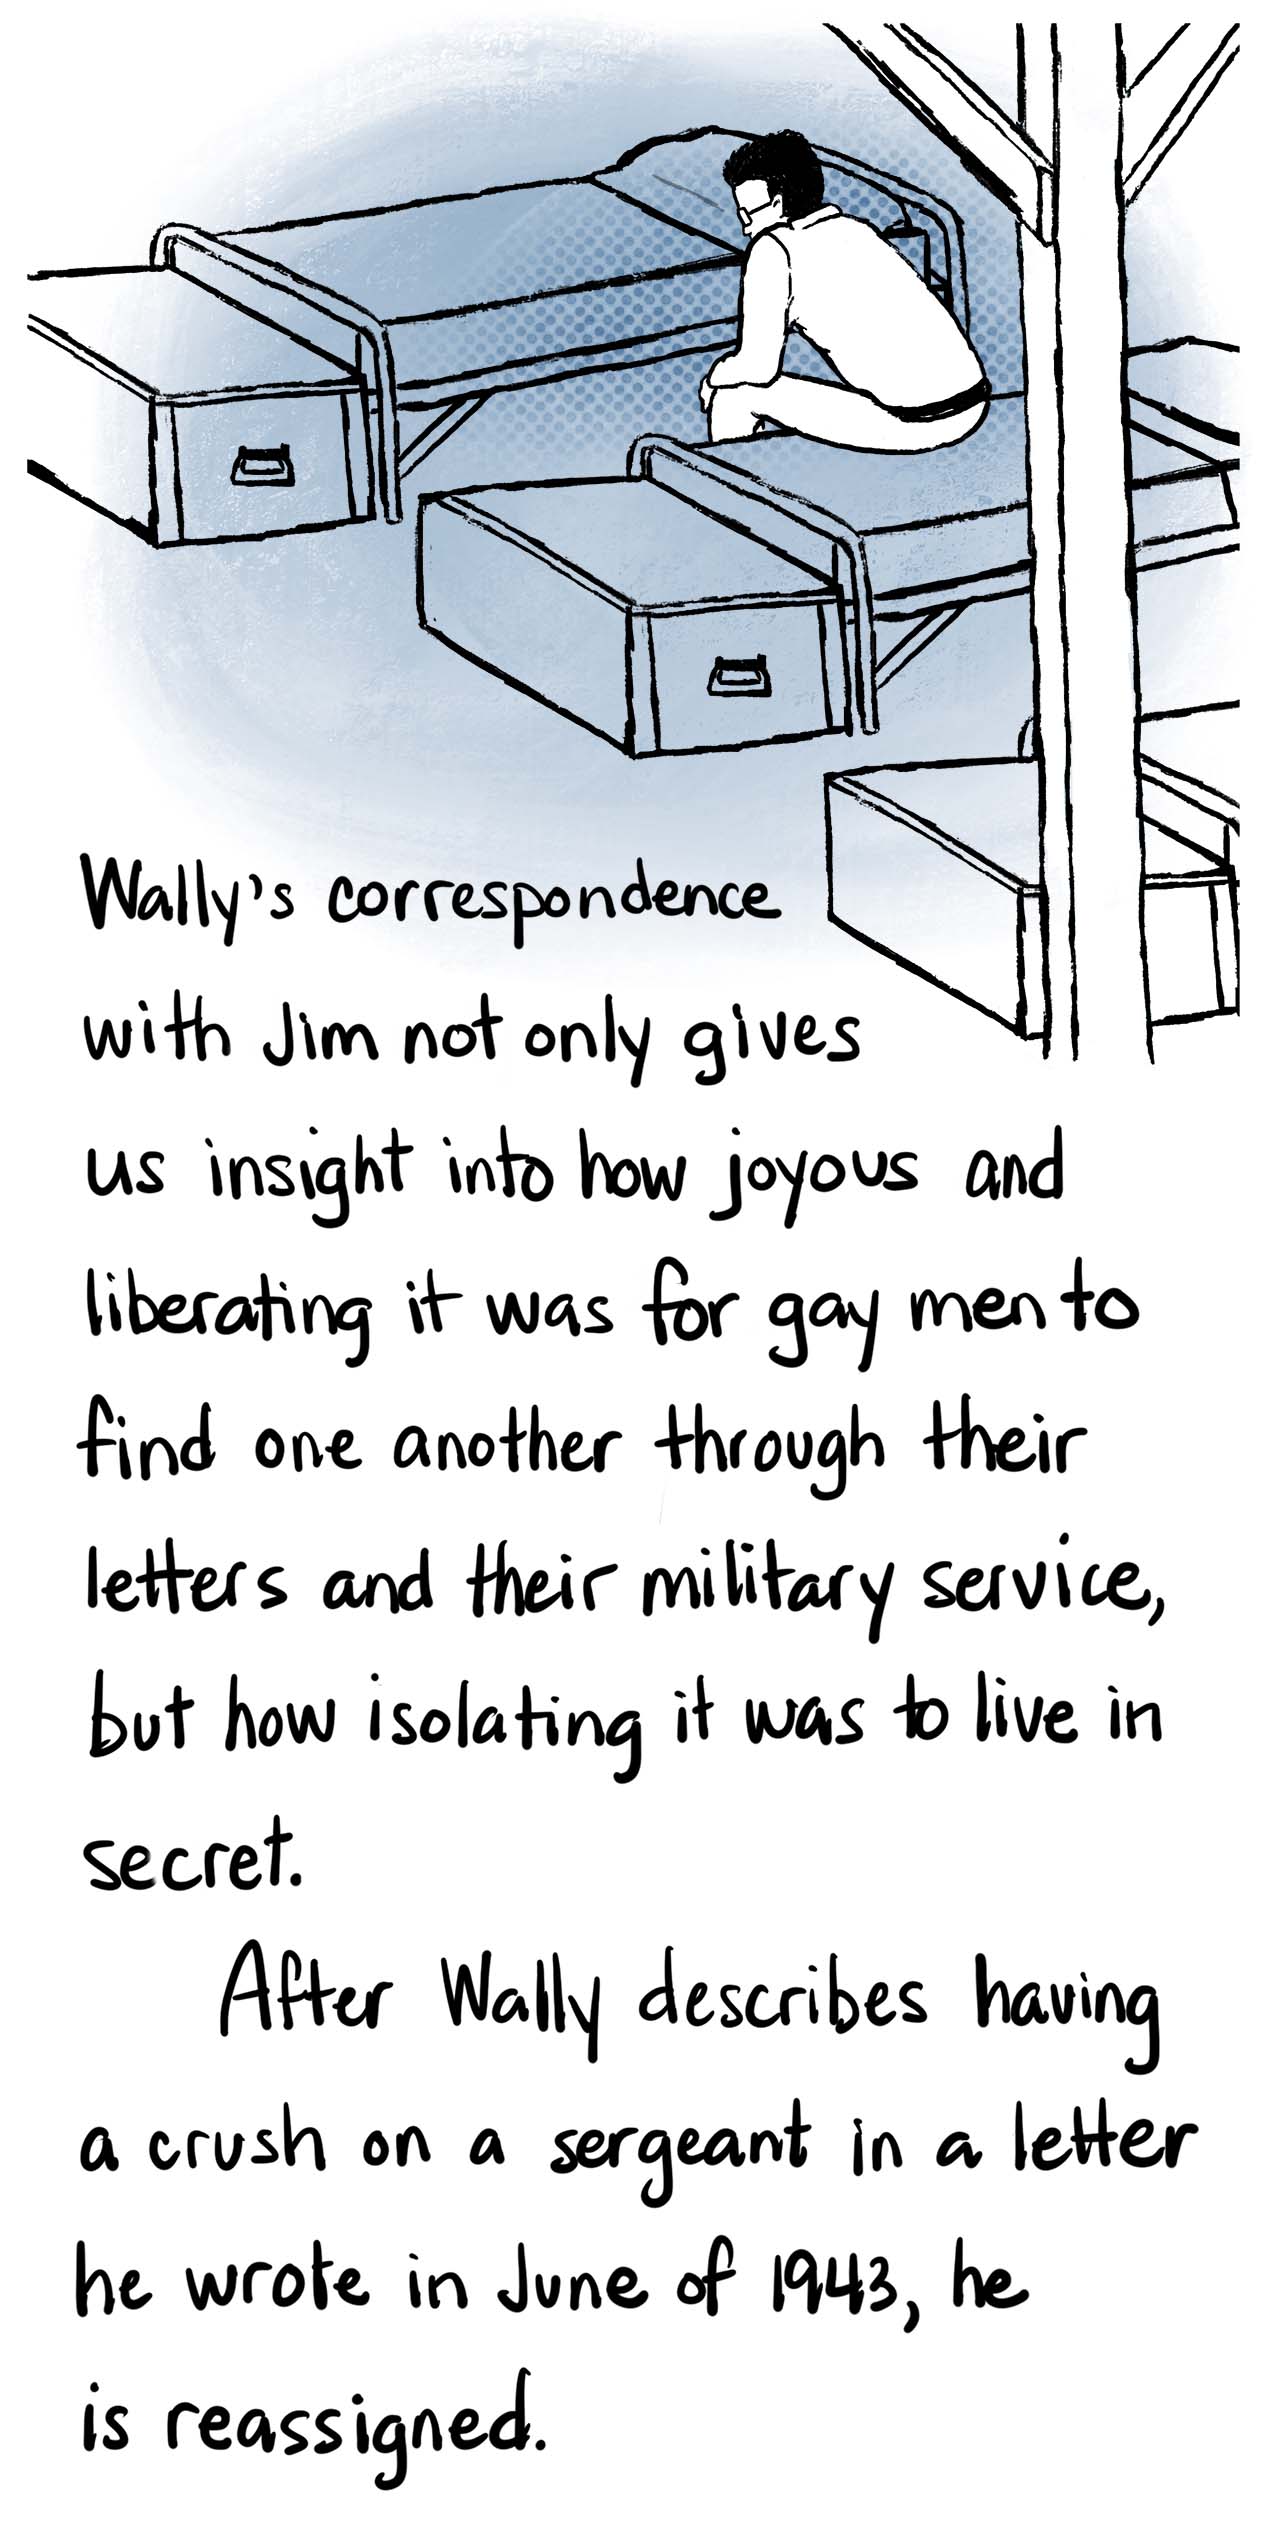 Image: Wally looking lonely in a barracks. Text: Wally’s correspondence with Jim not only gives us insight into how joyous and liberating it was for gay men to find one another through their letters and their military service, but how isolating it was to live in secret. After Wally describes having a crush on a sergeant, in a letter he wrote in June of 1943, he is reassigned.